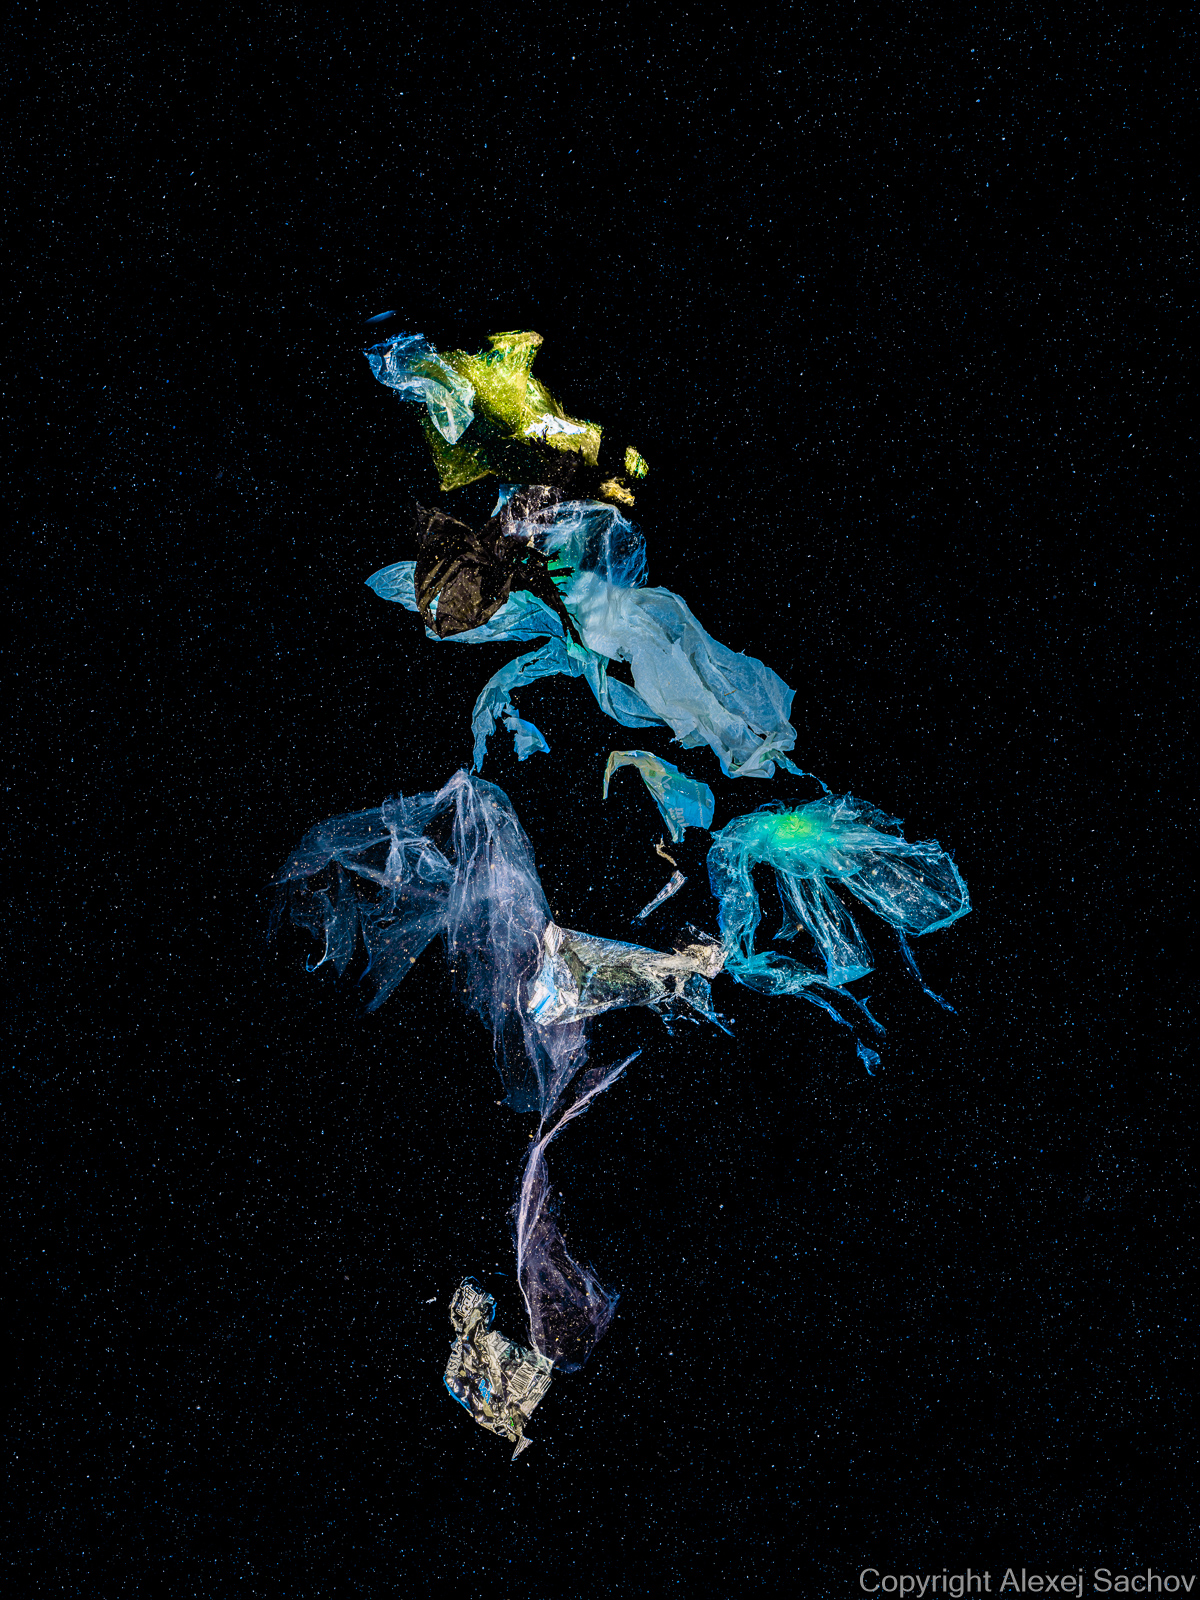 Within the ocean depths, the 'Ballerina' – a silhouette formed of plastic waste – performs an eerie dance. A testament to our disposable culture, she foreshadows a future filled with such haunting spectres.